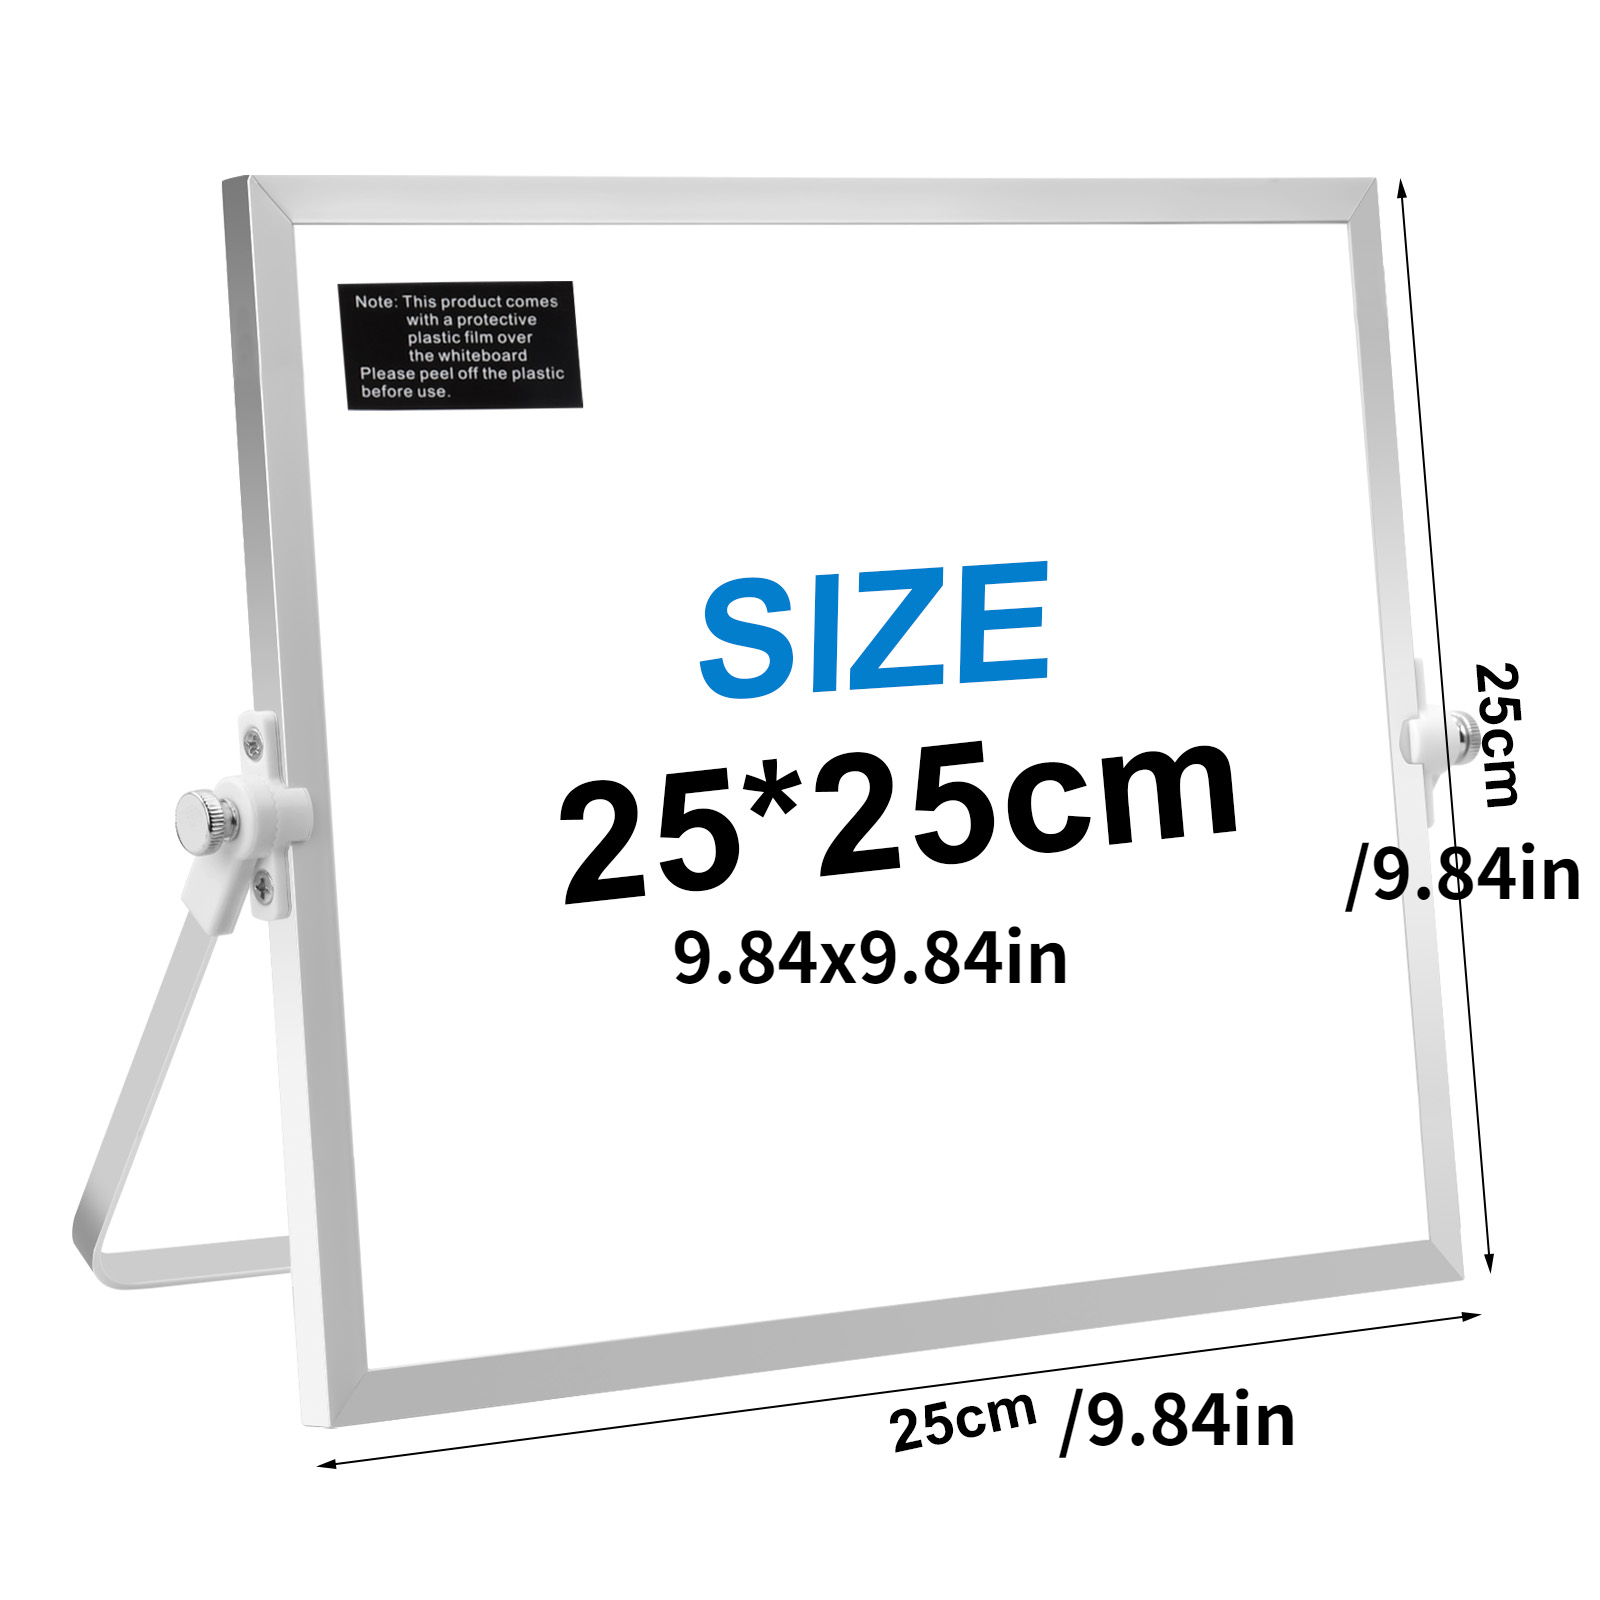 Small White Boards for Students, Dry Erase Board for Kids With